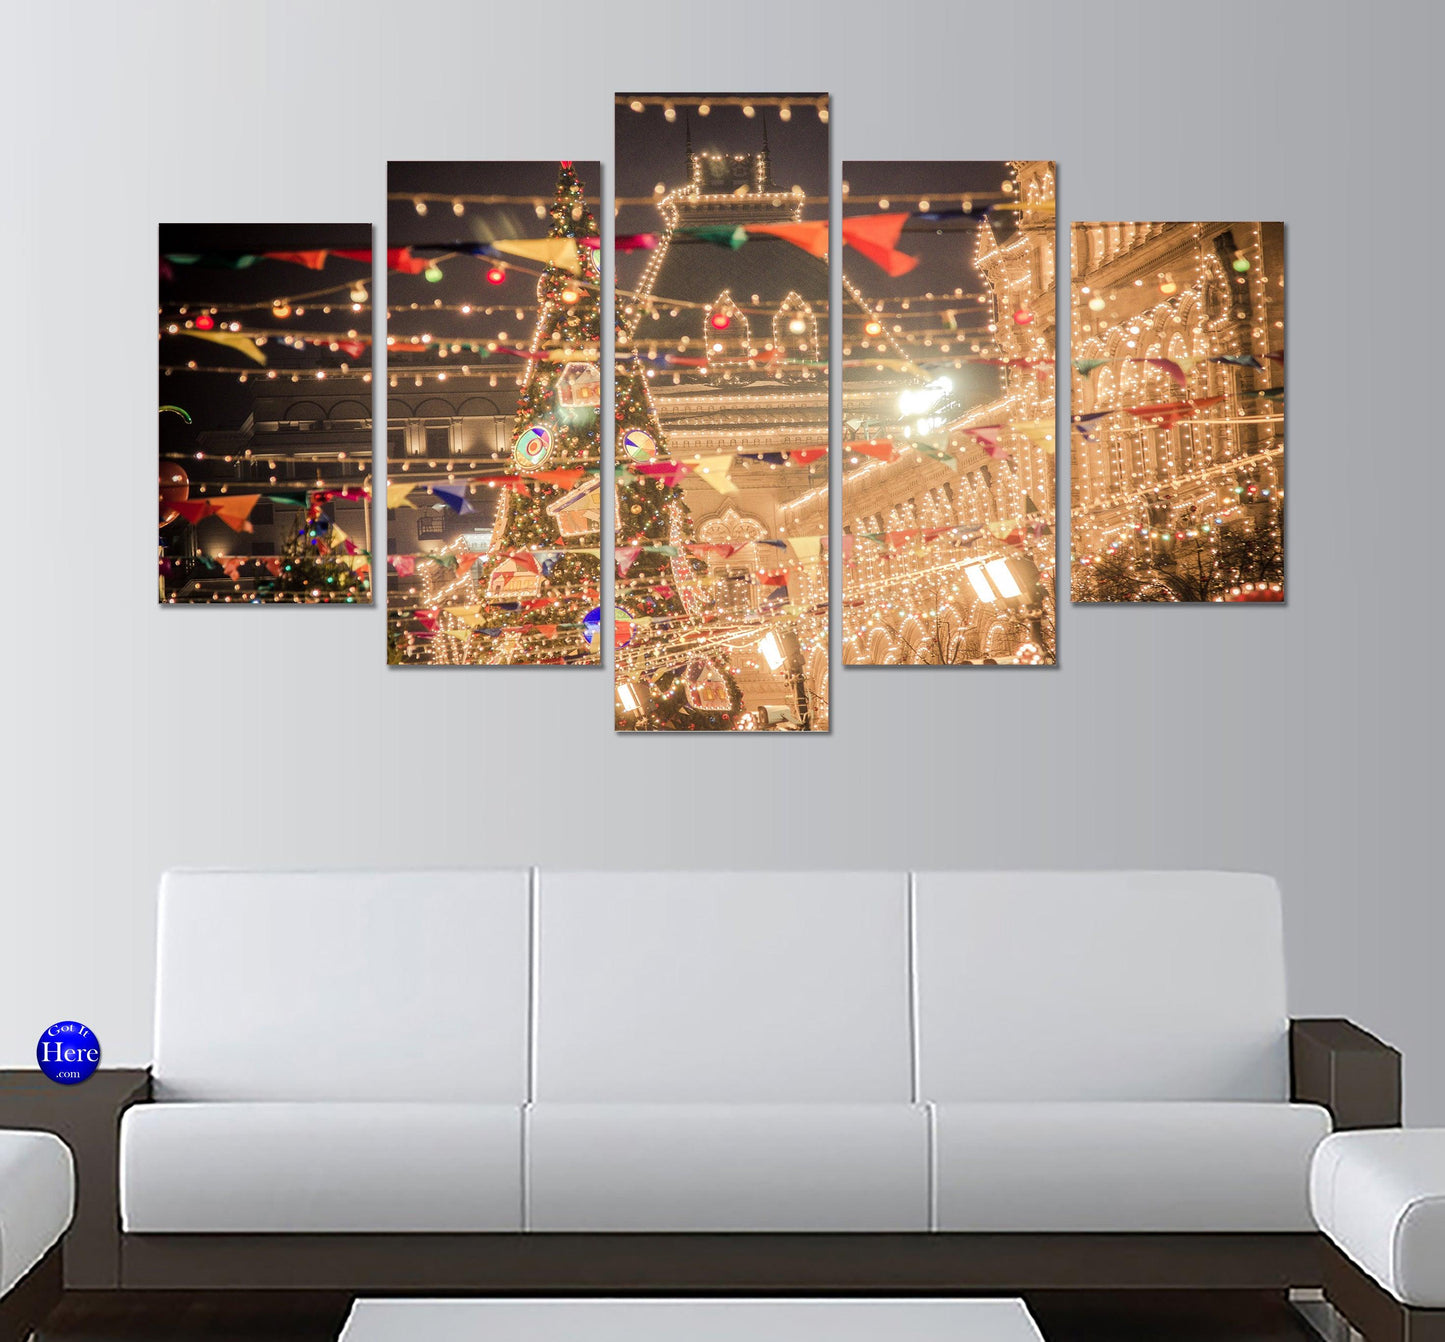 Christmas Tree And Lights - Red Square - Moscow, Russia 5 Panel Canvas Print Wall Art - GotItHere.com